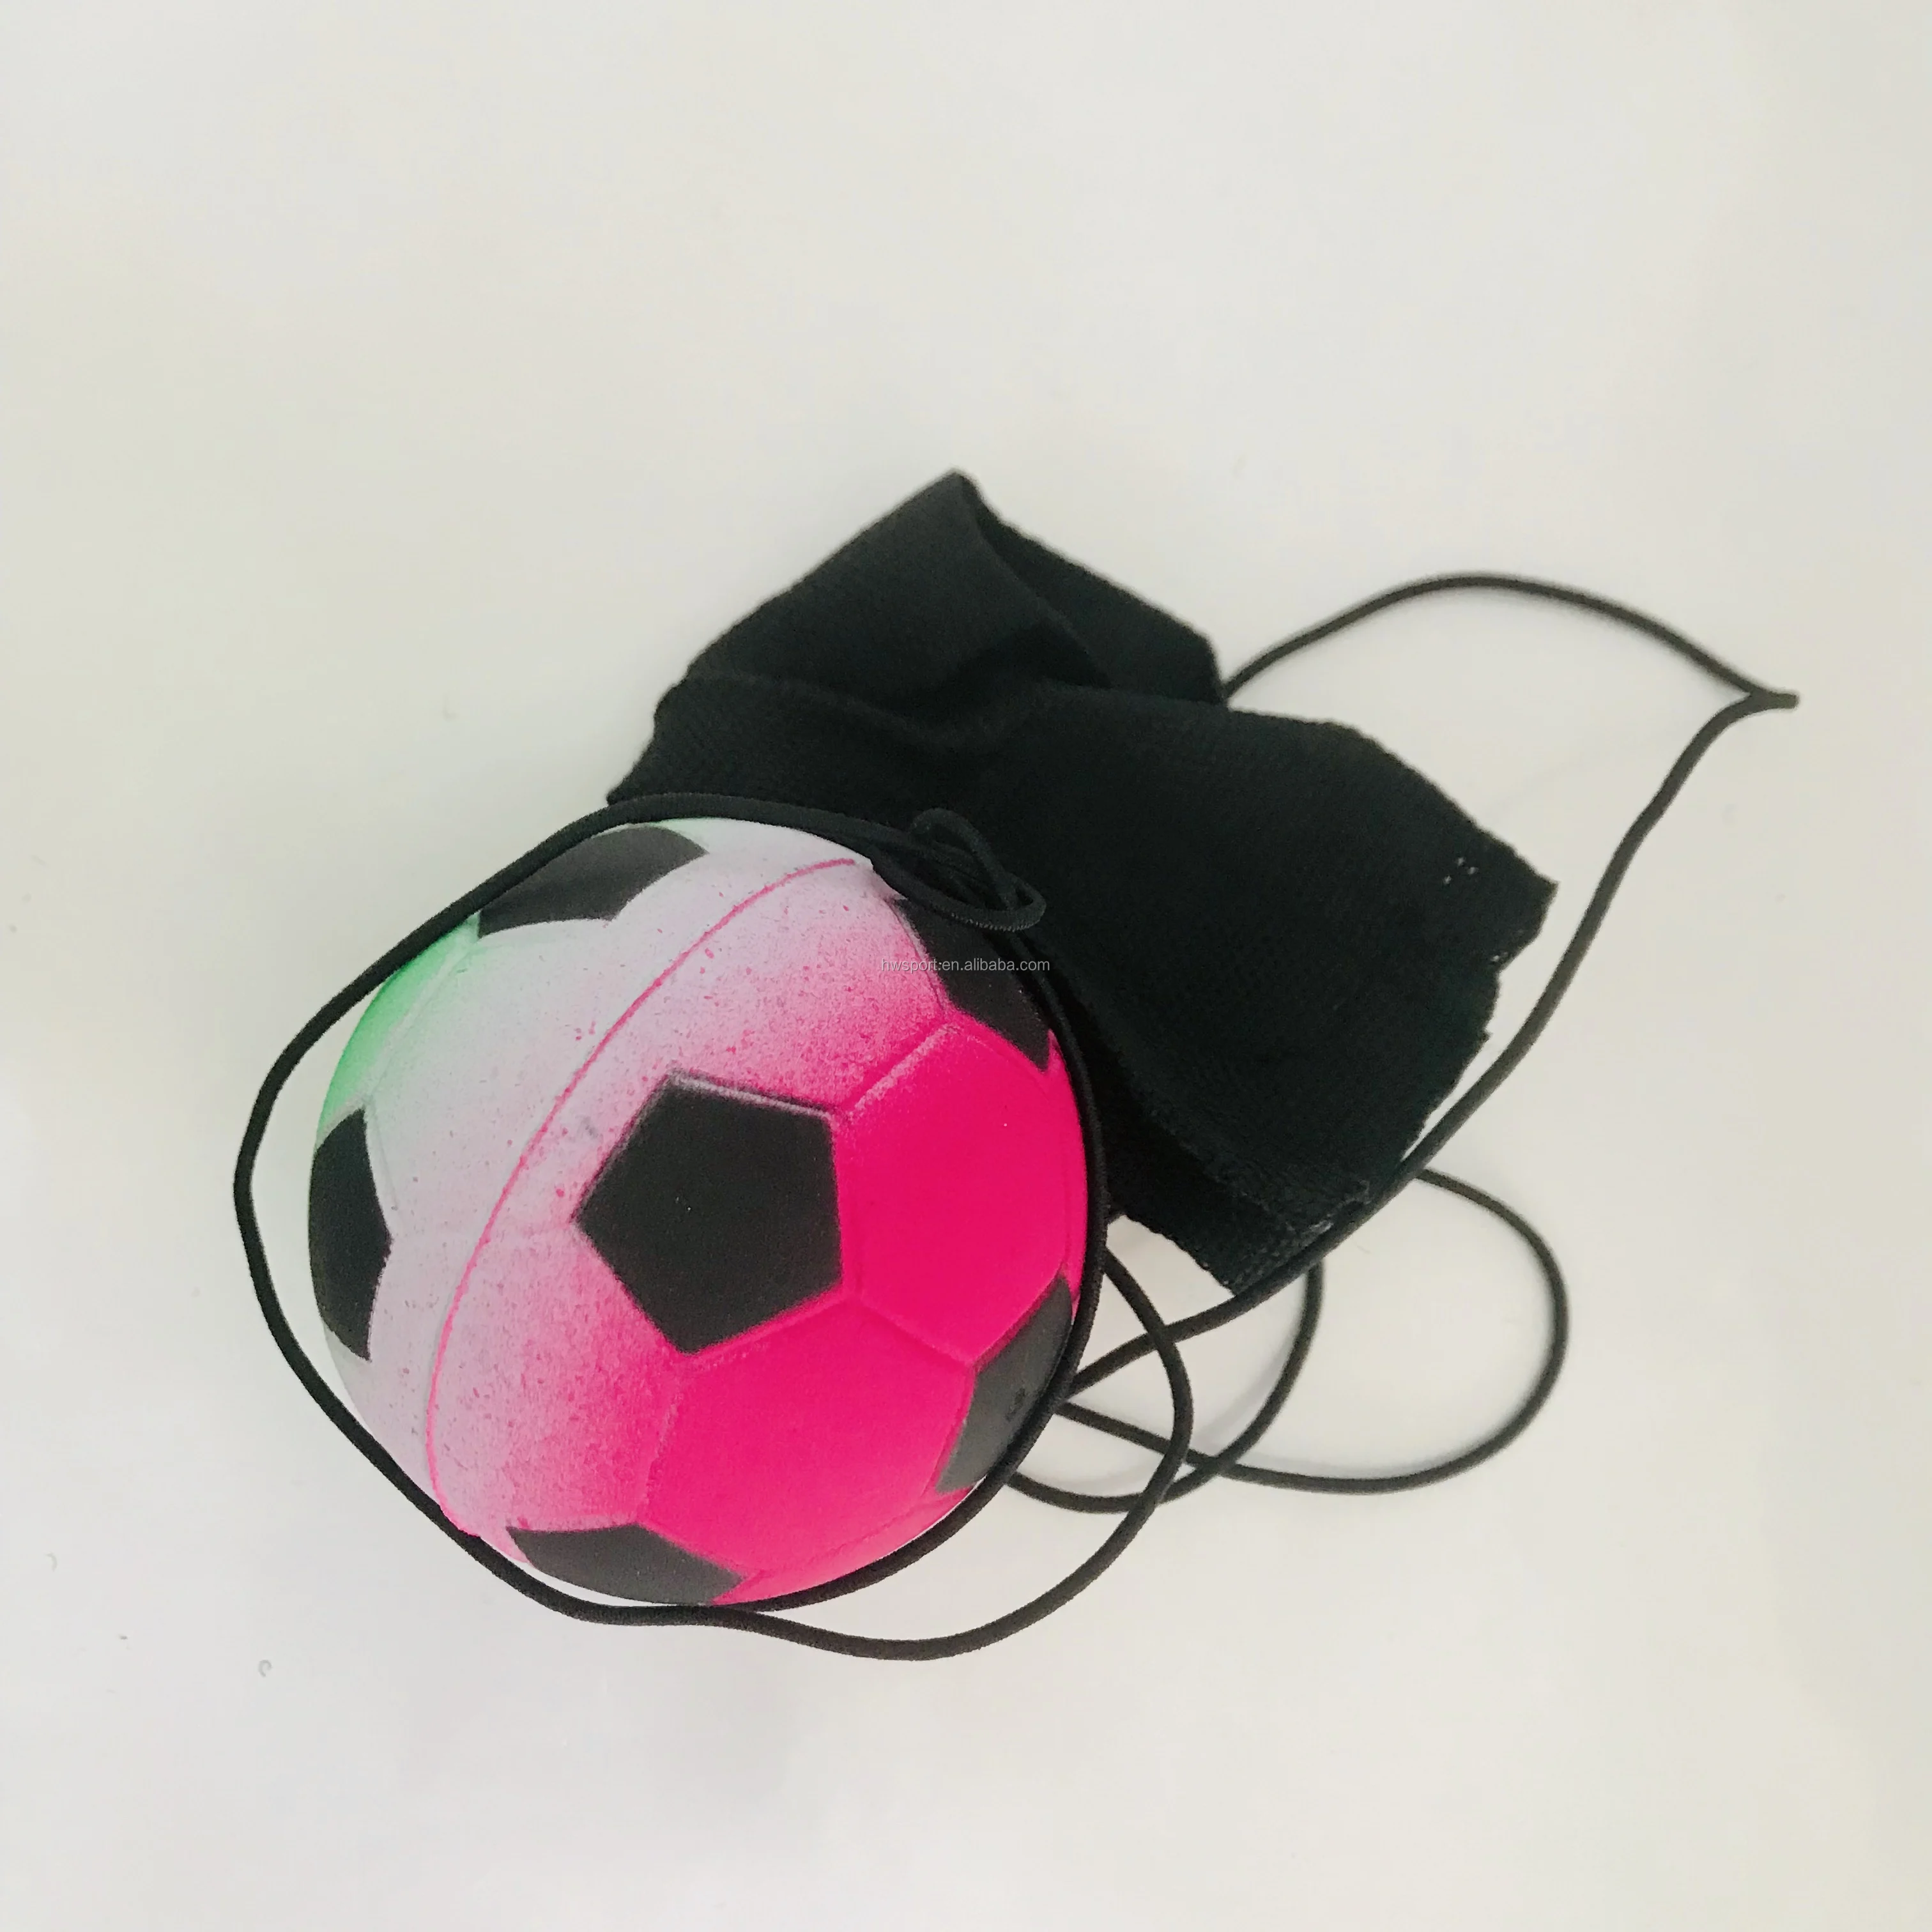 Details about   Toys Relief Games Kids Toy Return Ball Hobbies Brain Game Toy Wrist Band Ball CF 